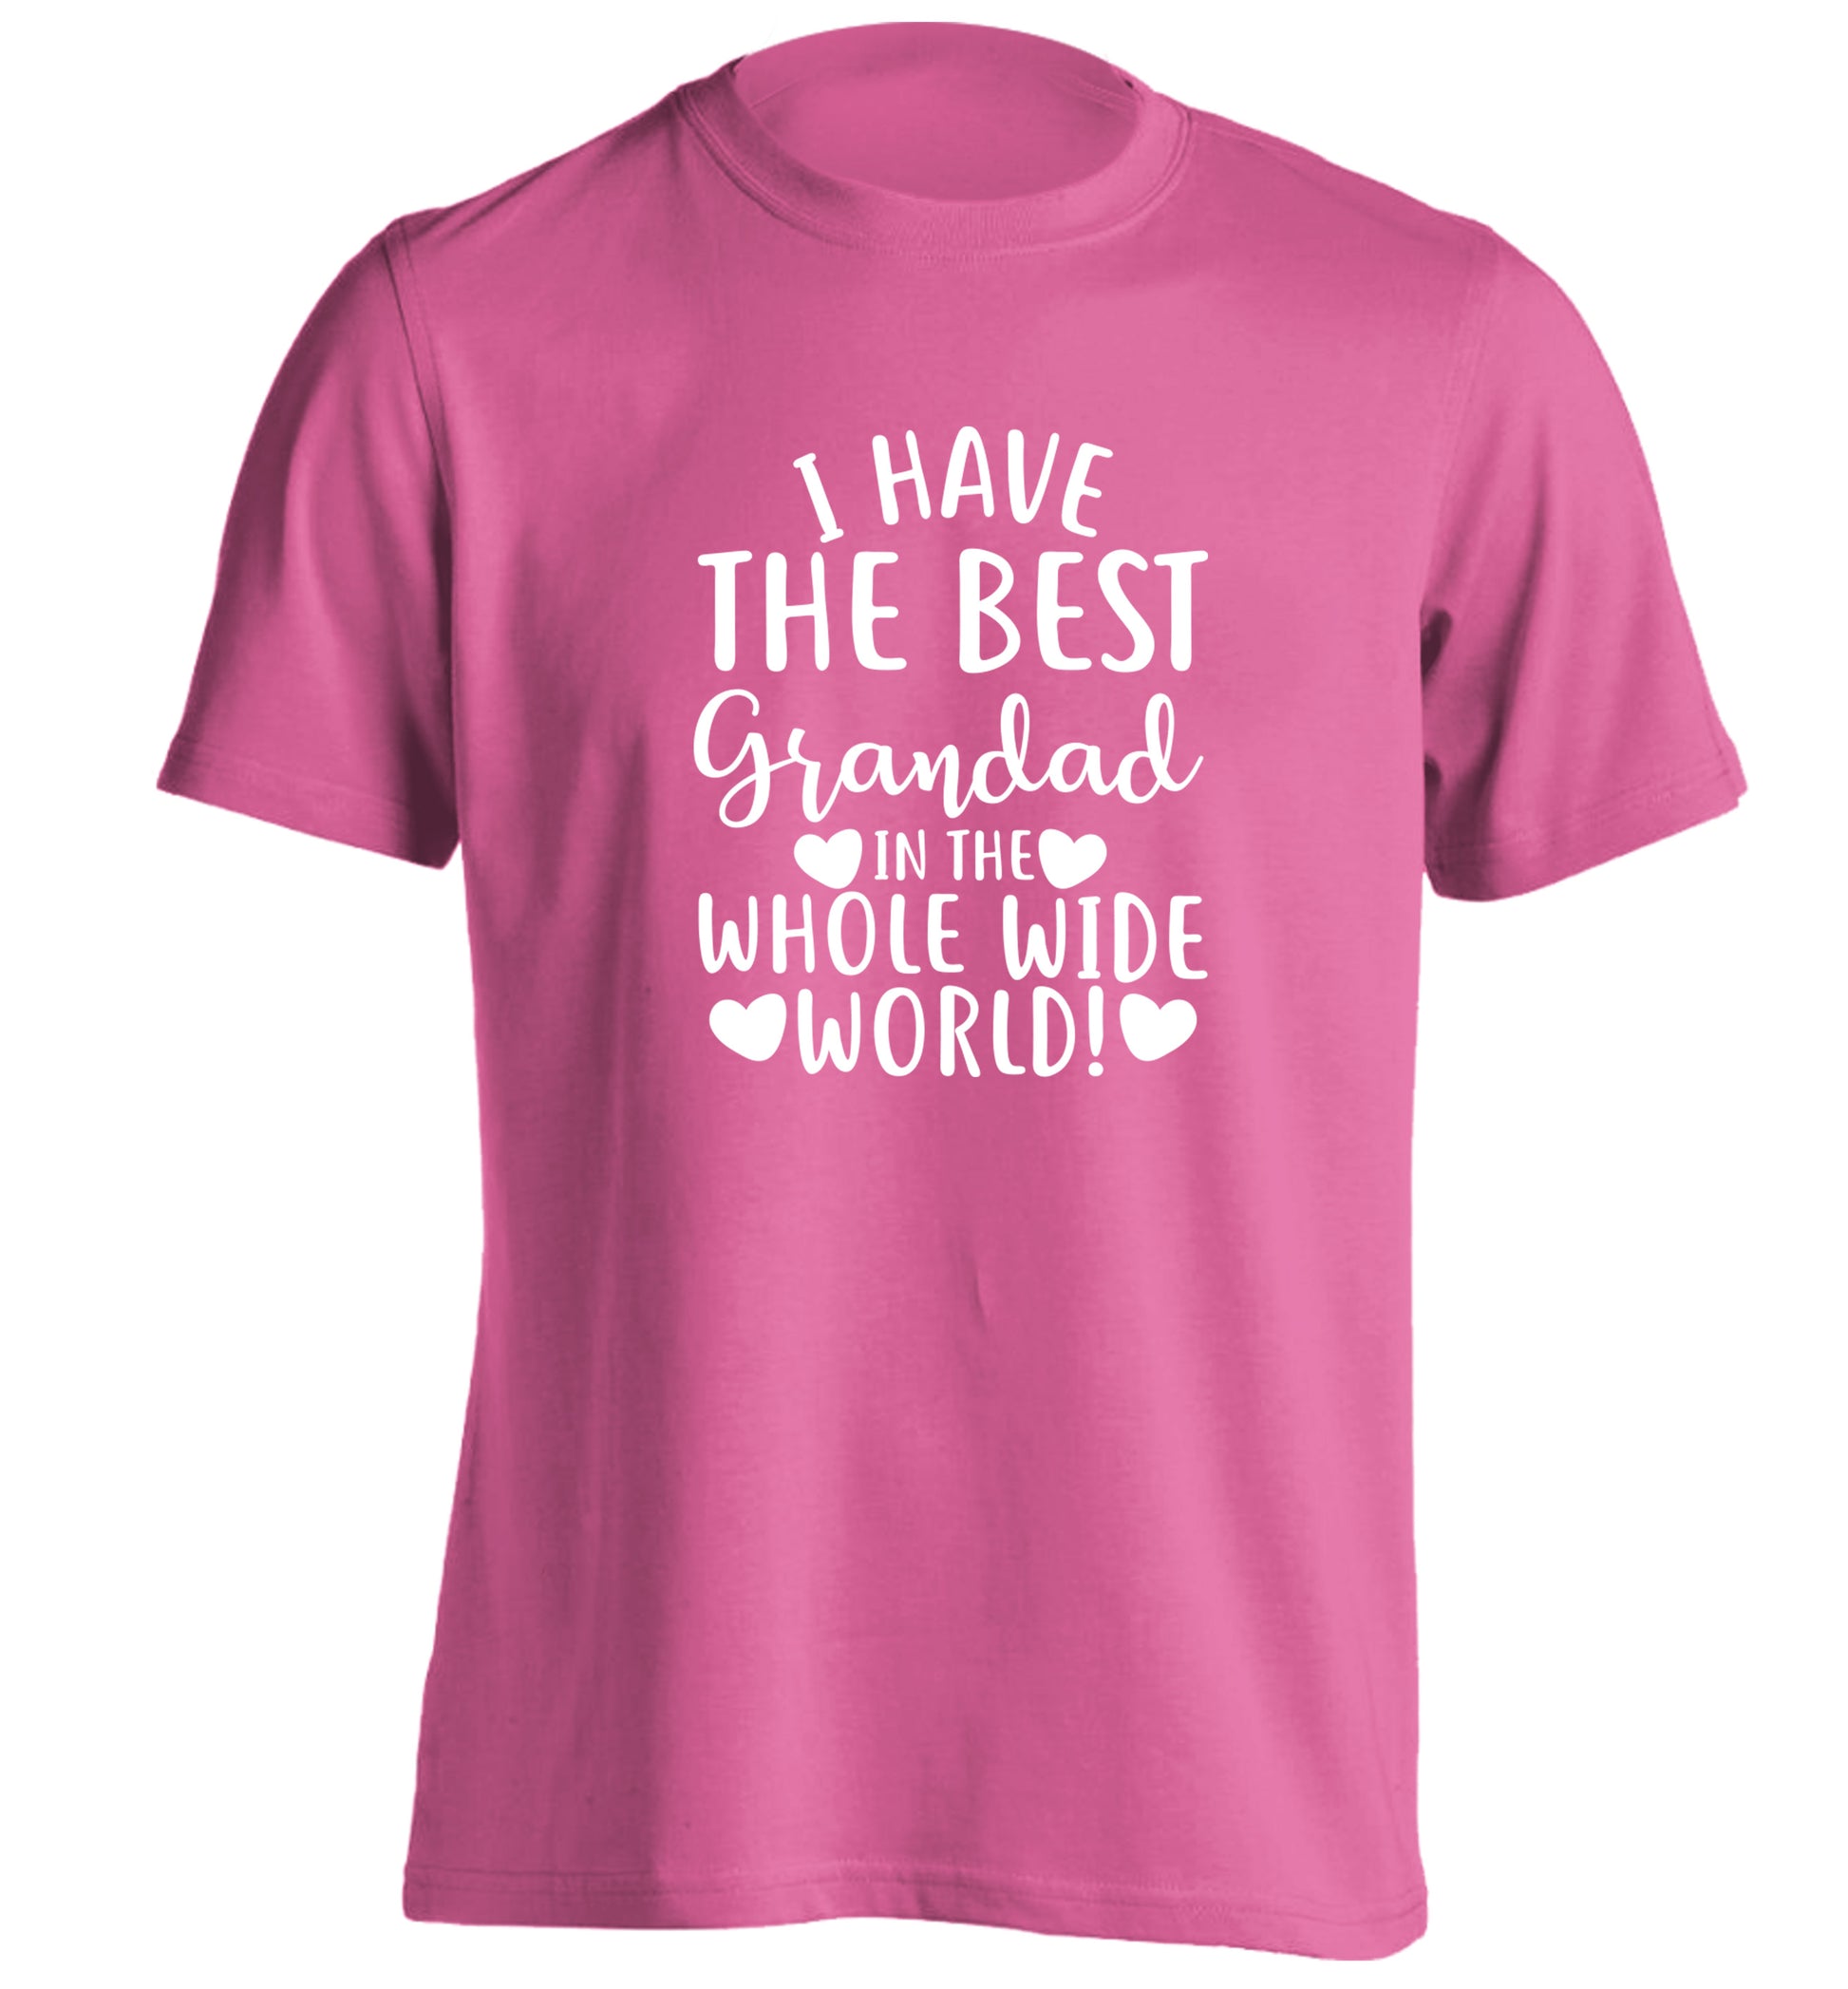 I have the best grandad in the whole wide world! adults unisex pink Tshirt 2XL